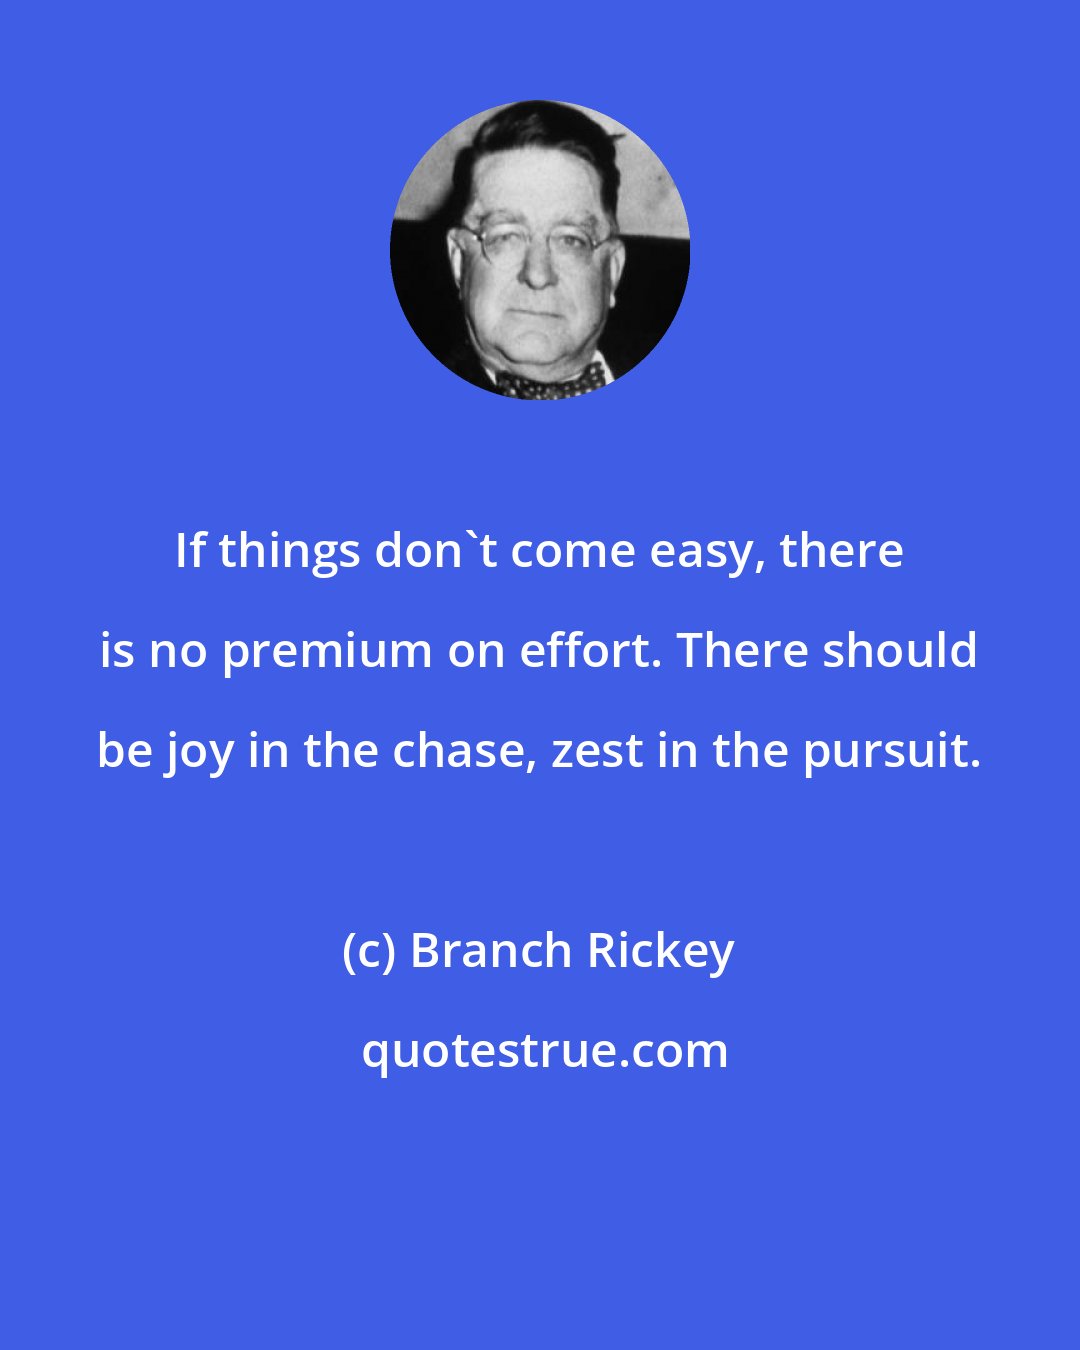 Branch Rickey: If things don't come easy, there is no premium on effort. There should be joy in the chase, zest in the pursuit.